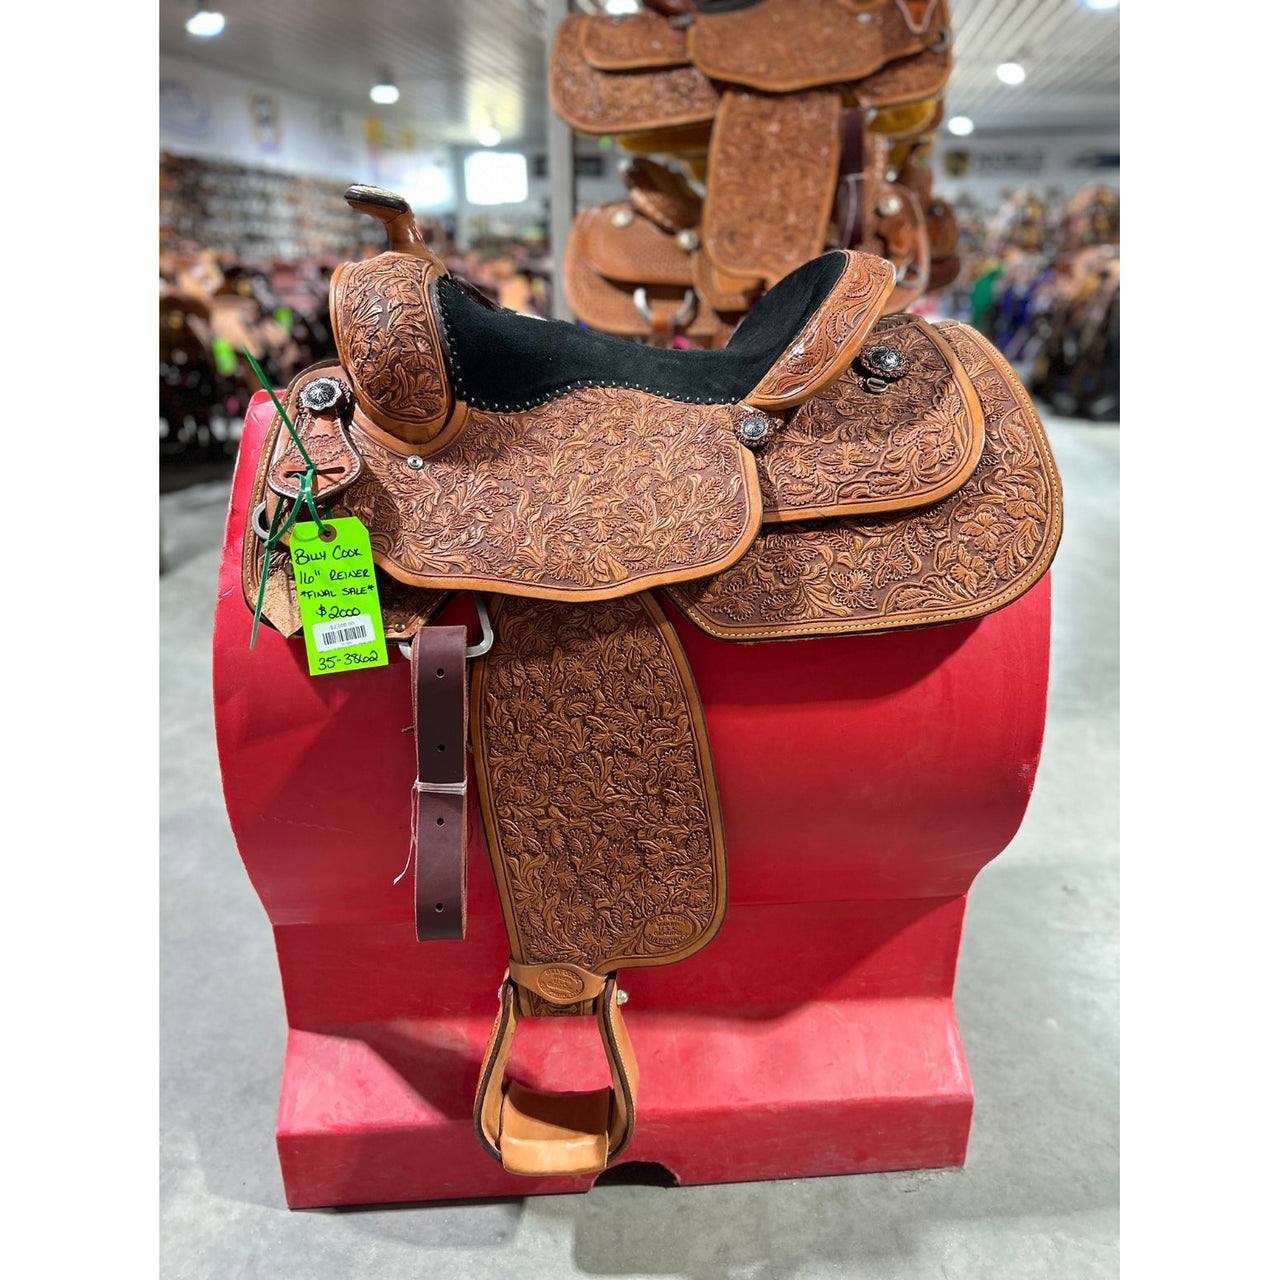 Billy Cook 16" Reining Saddle - FINAL SALE